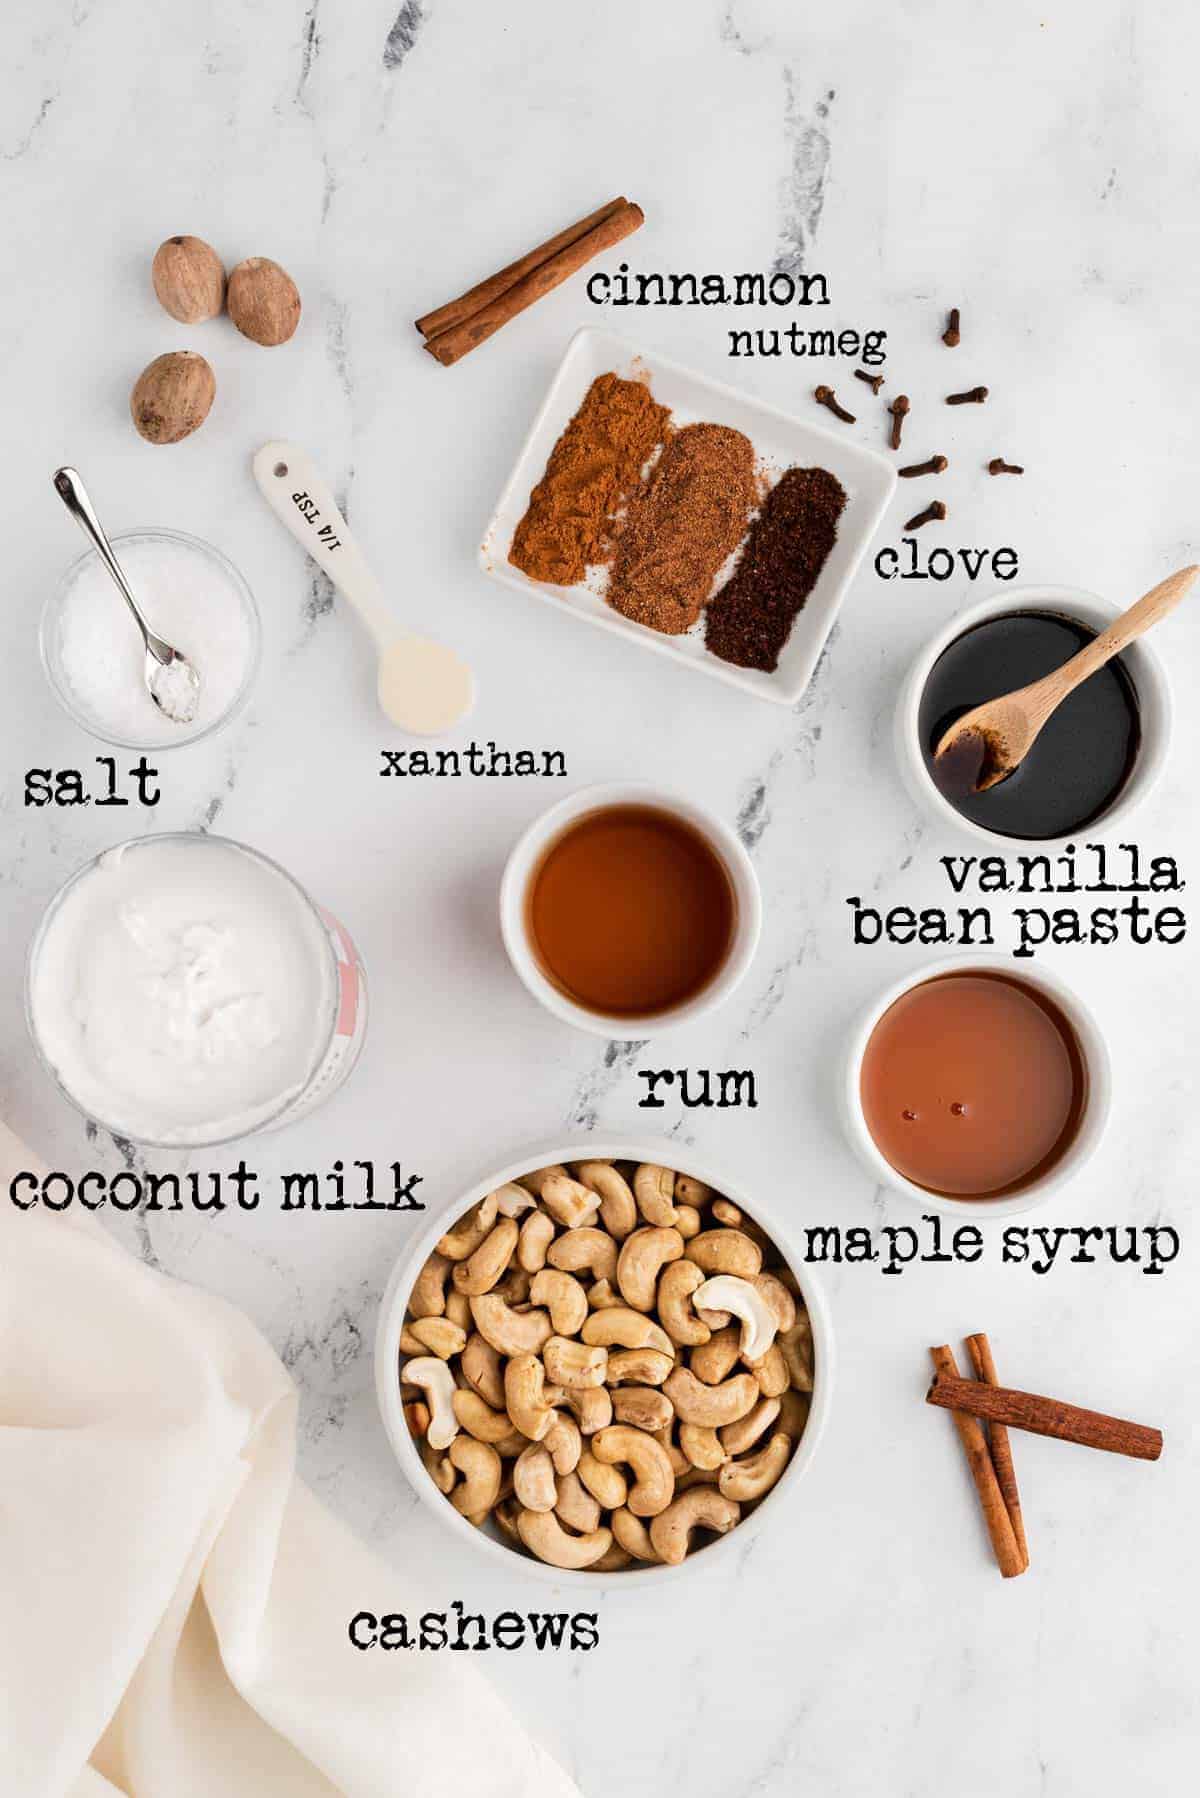 labeled ingredients needed for a vegan eggnog recipe